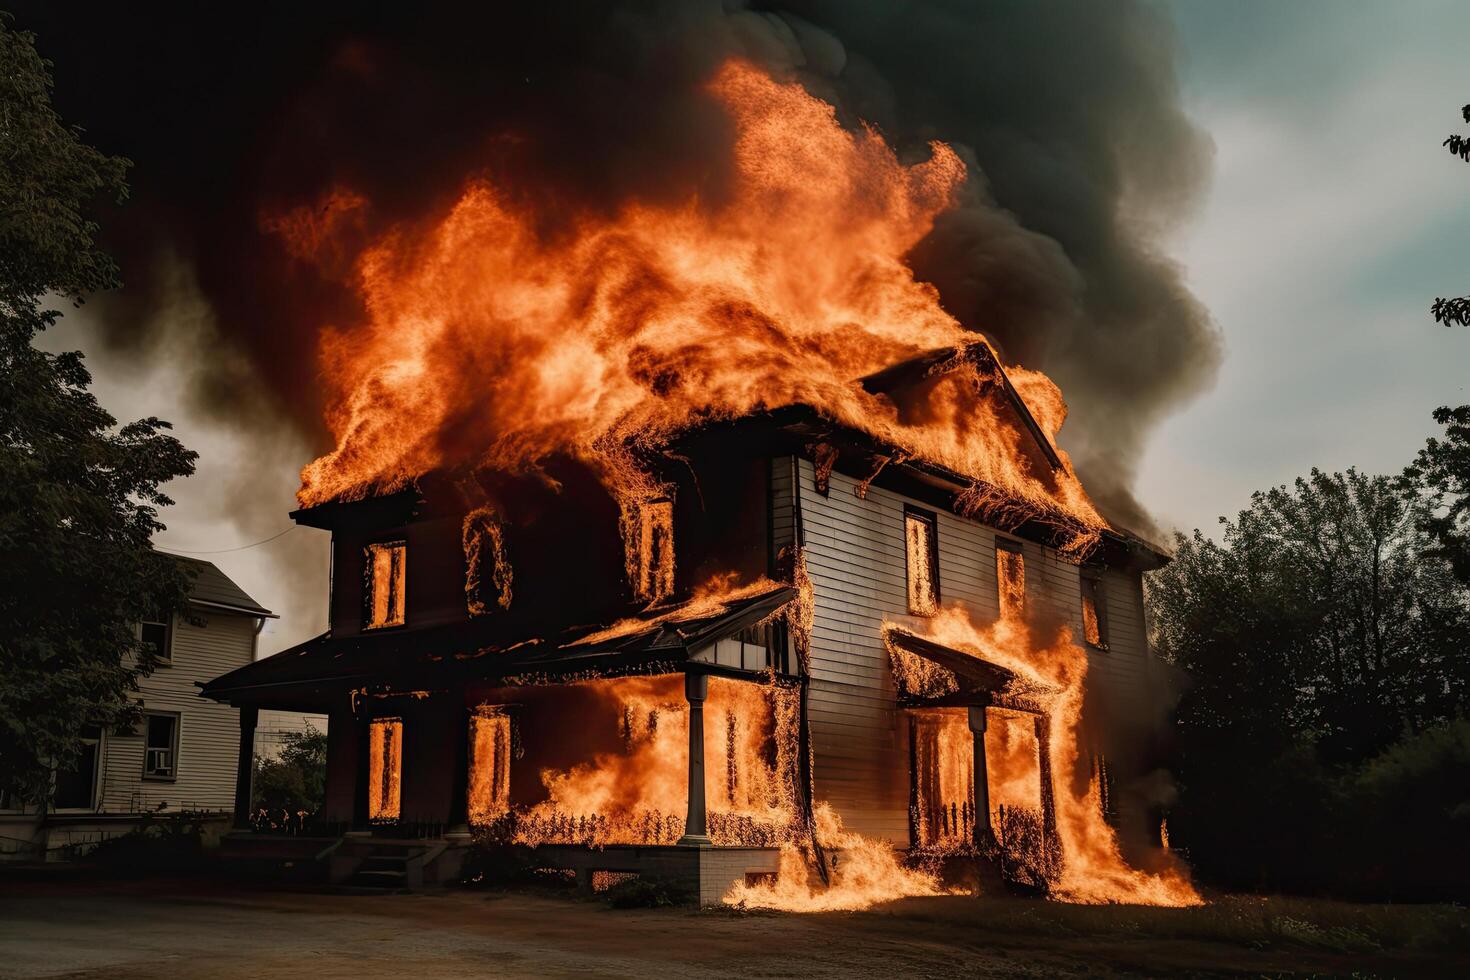 Burning house. Fire in the house. Burned house. A house is on fire, photo